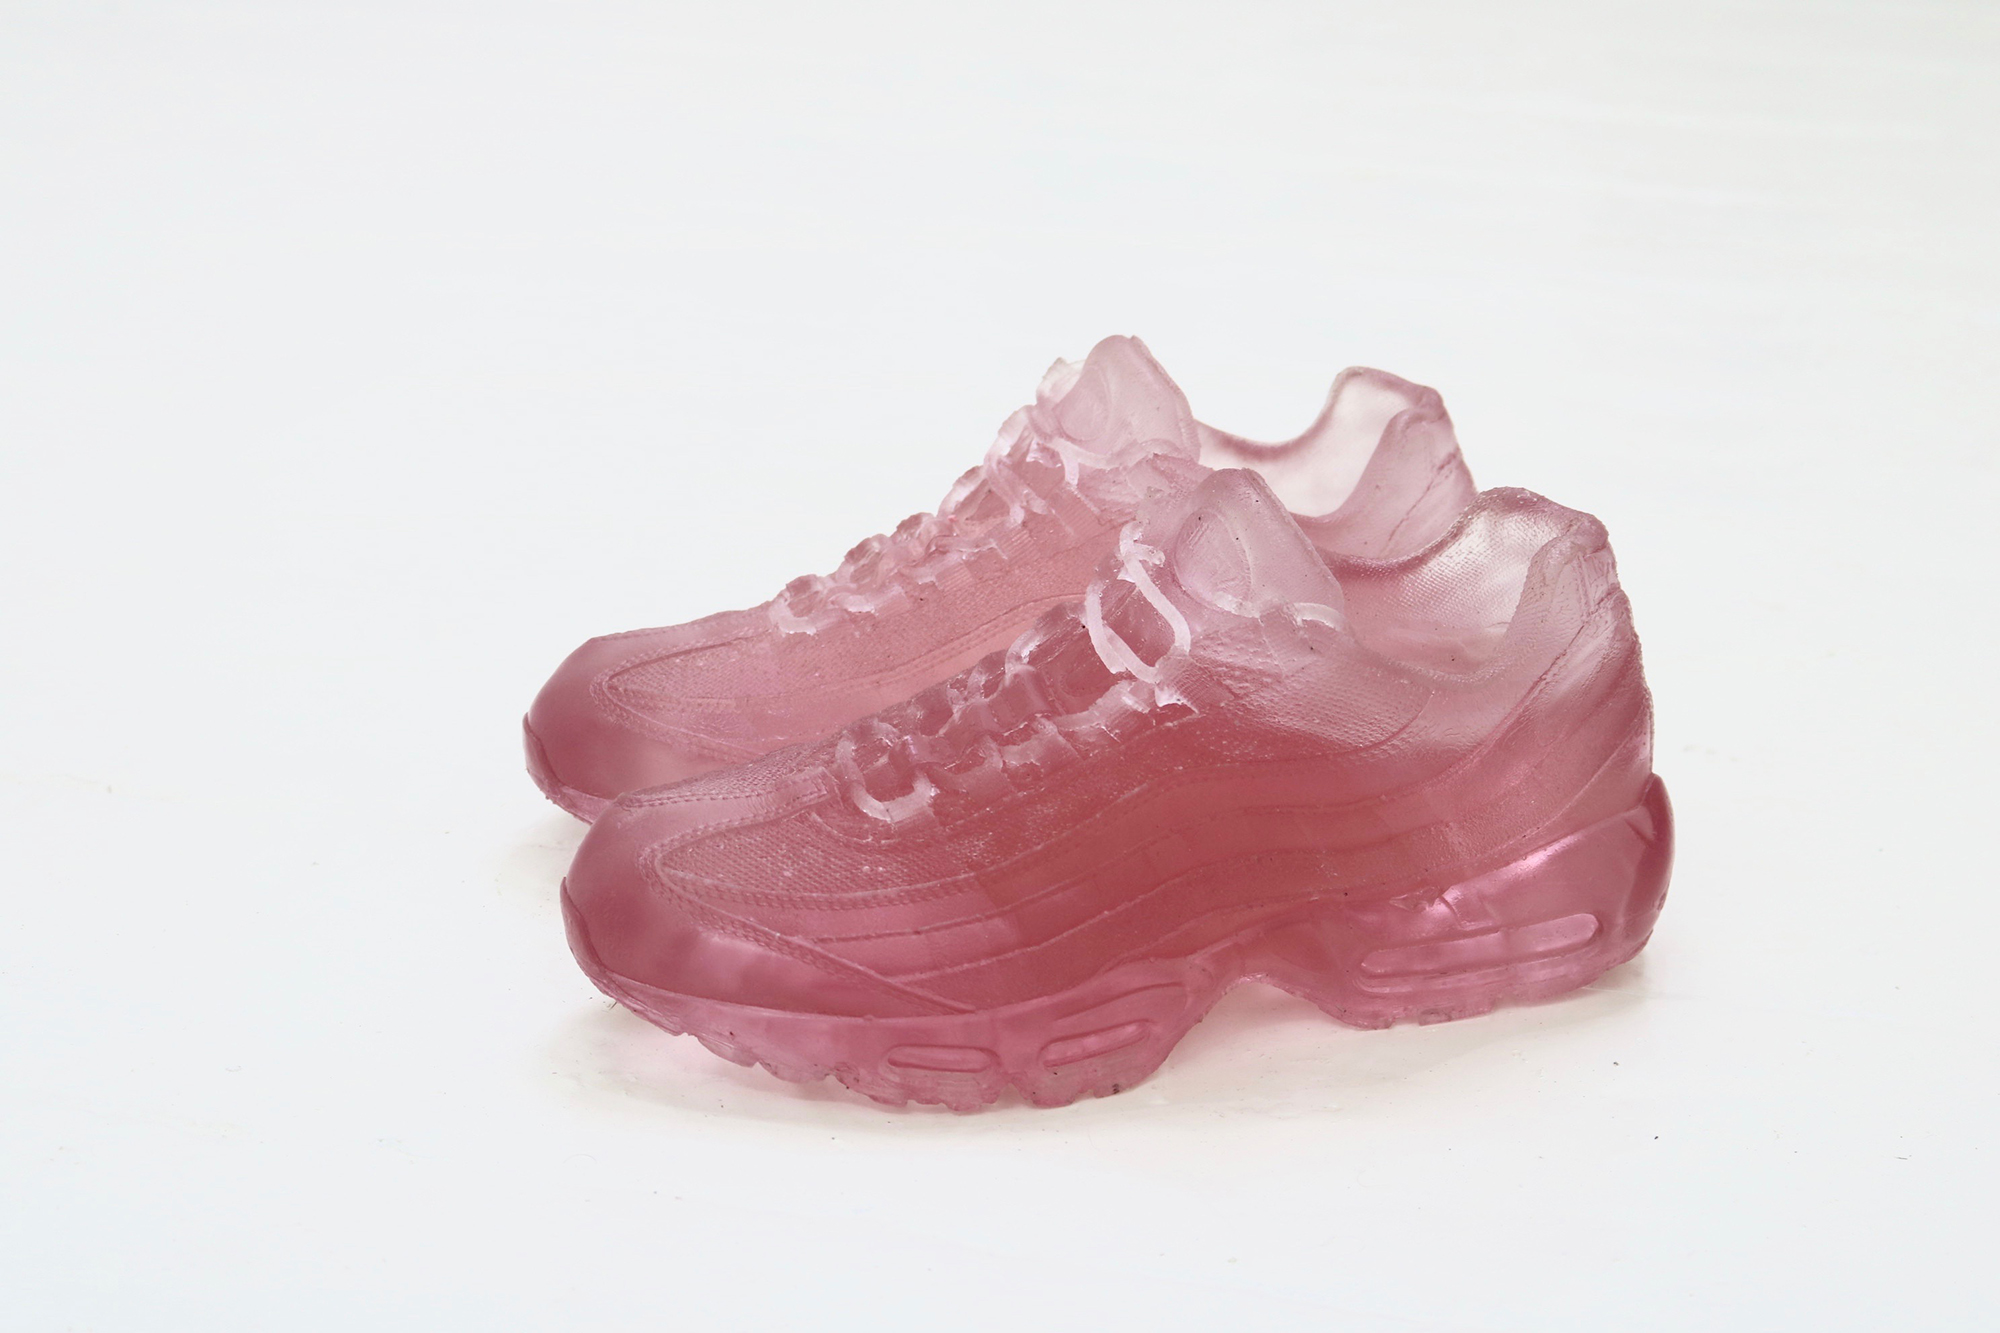   Air Max 95's,&nbsp; 2018, resin with pigment,&nbsp;mens UK size 8.5 